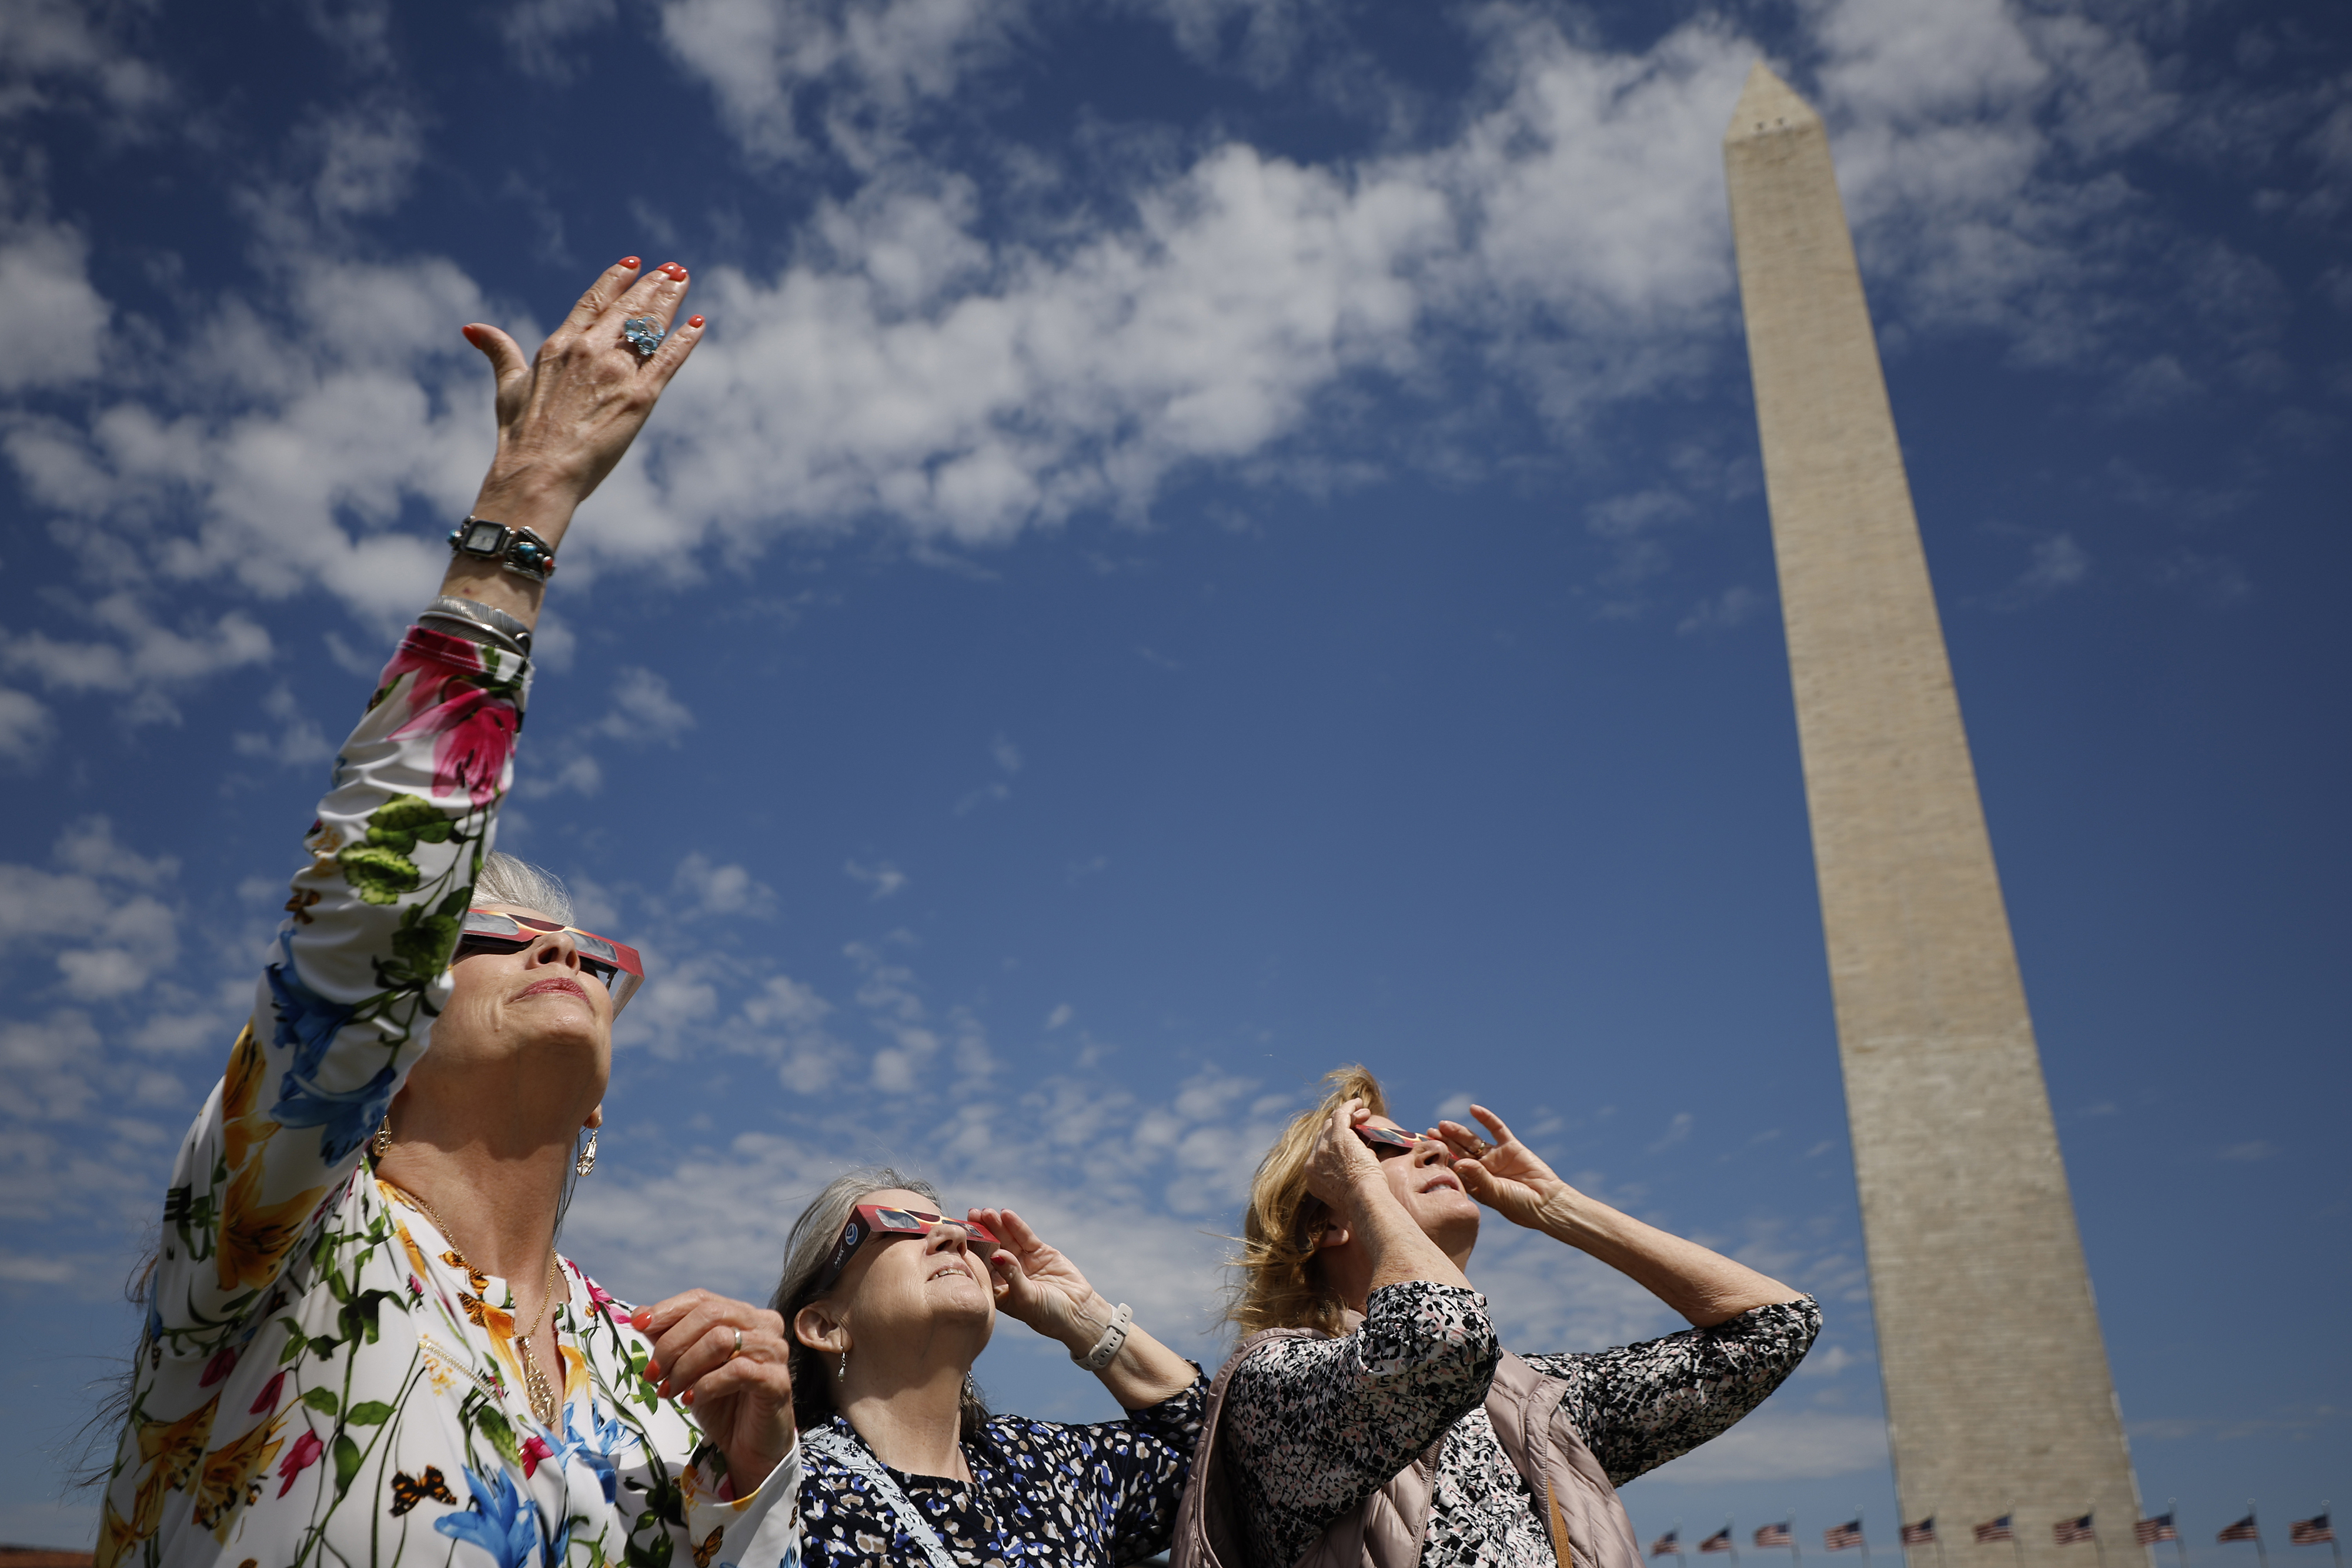 Three people looking upwards with hands raised near the Washington Monument, clear sky in the background